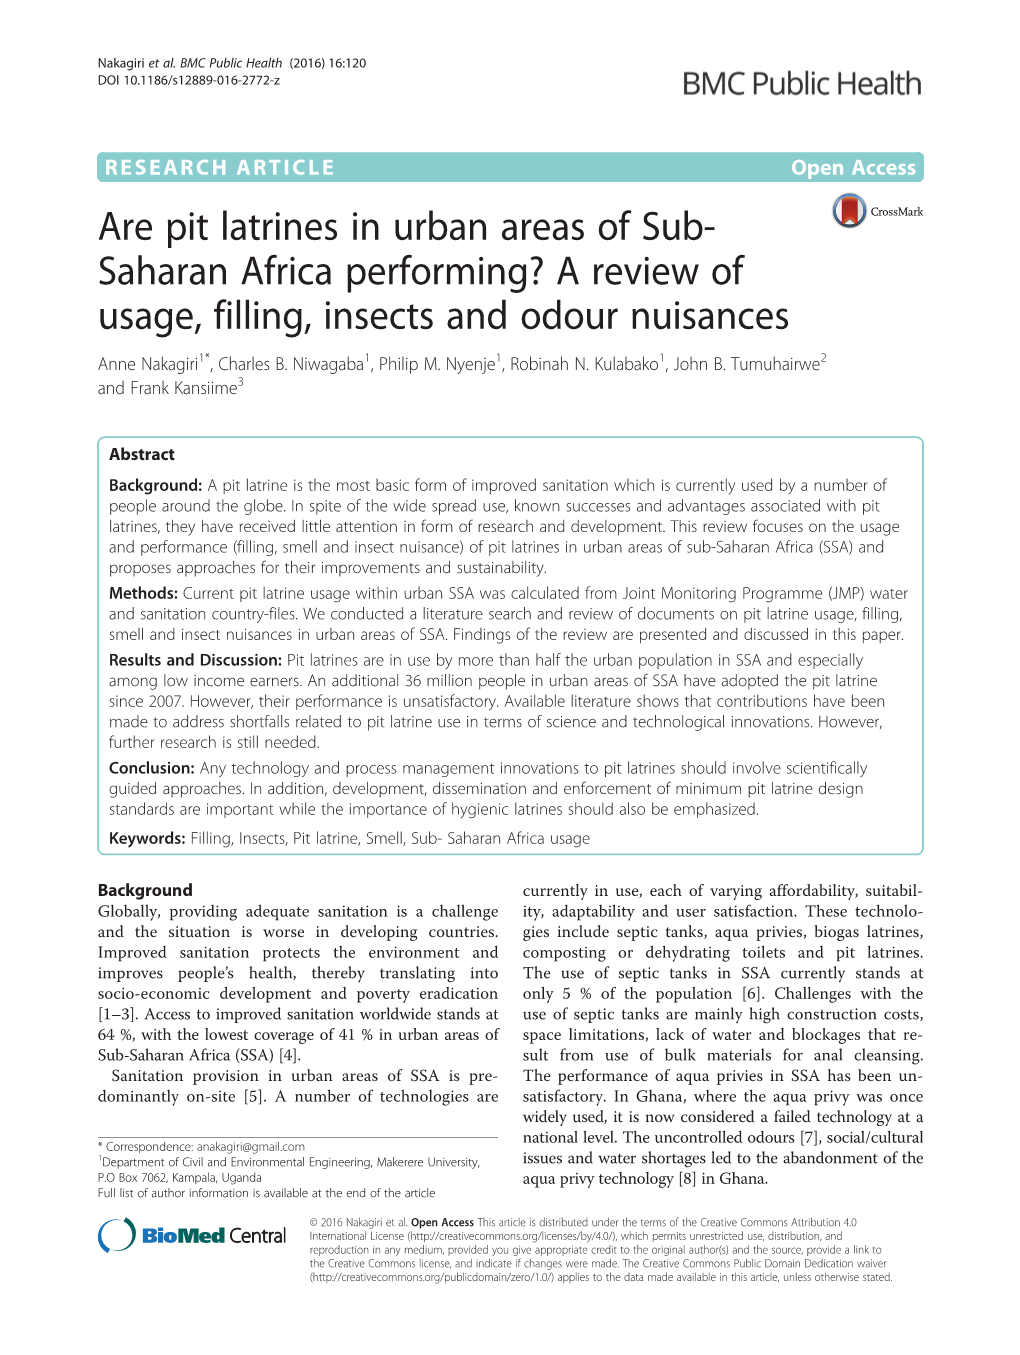 Are Pit Latrines in Urban Areas of Sub-Saharan Africa